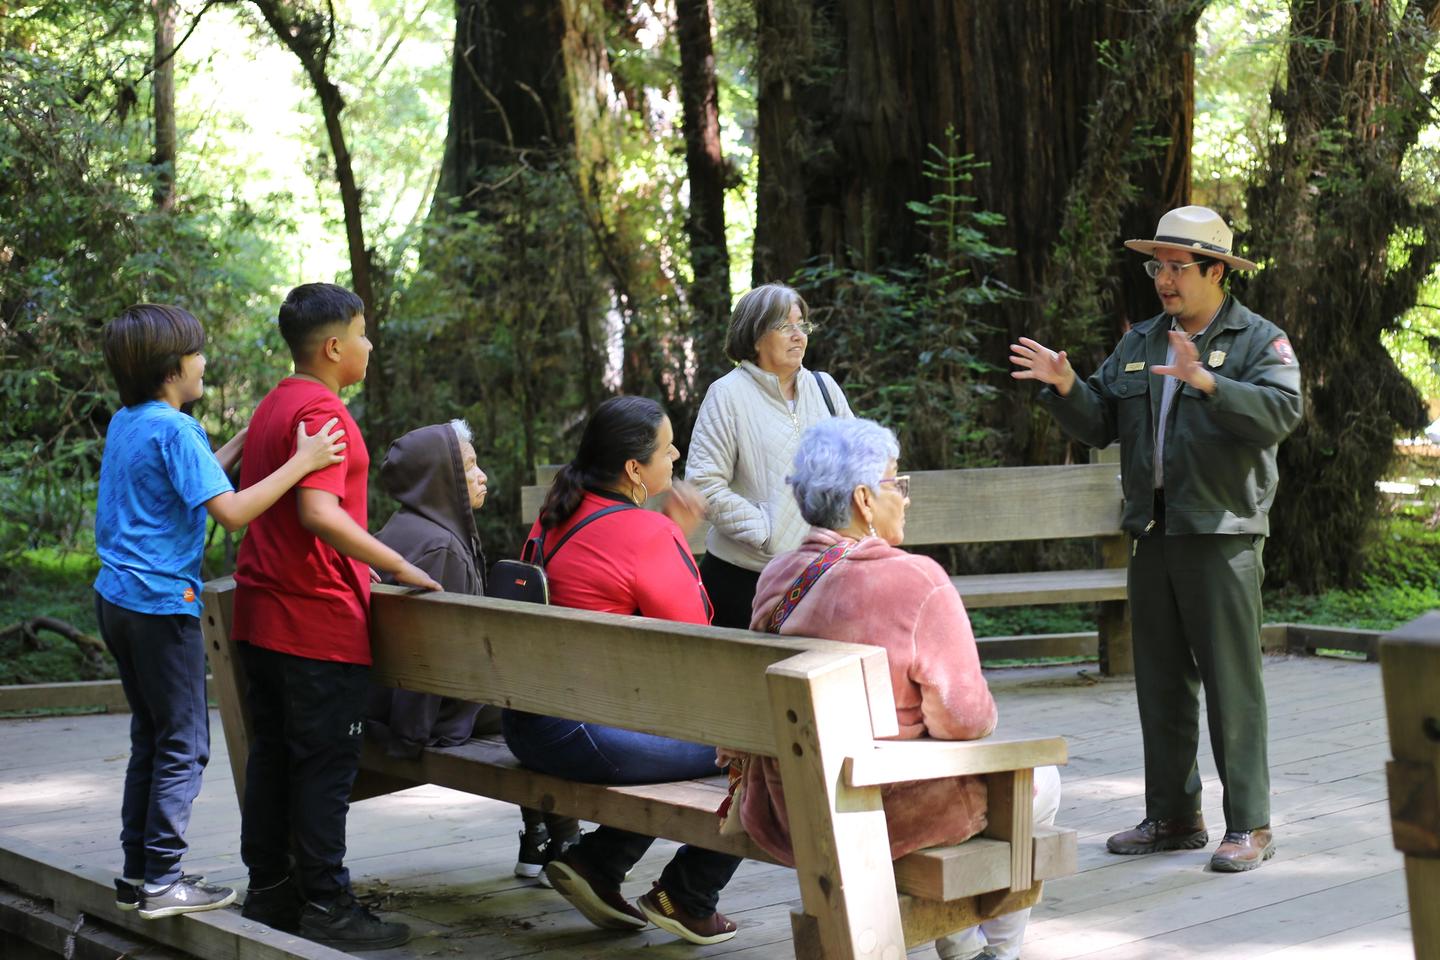 Informal interpretation at Muir WoodsMuir Woods rangers deliver daily tree talks to connect visitors with the redwood forest ecosystem.